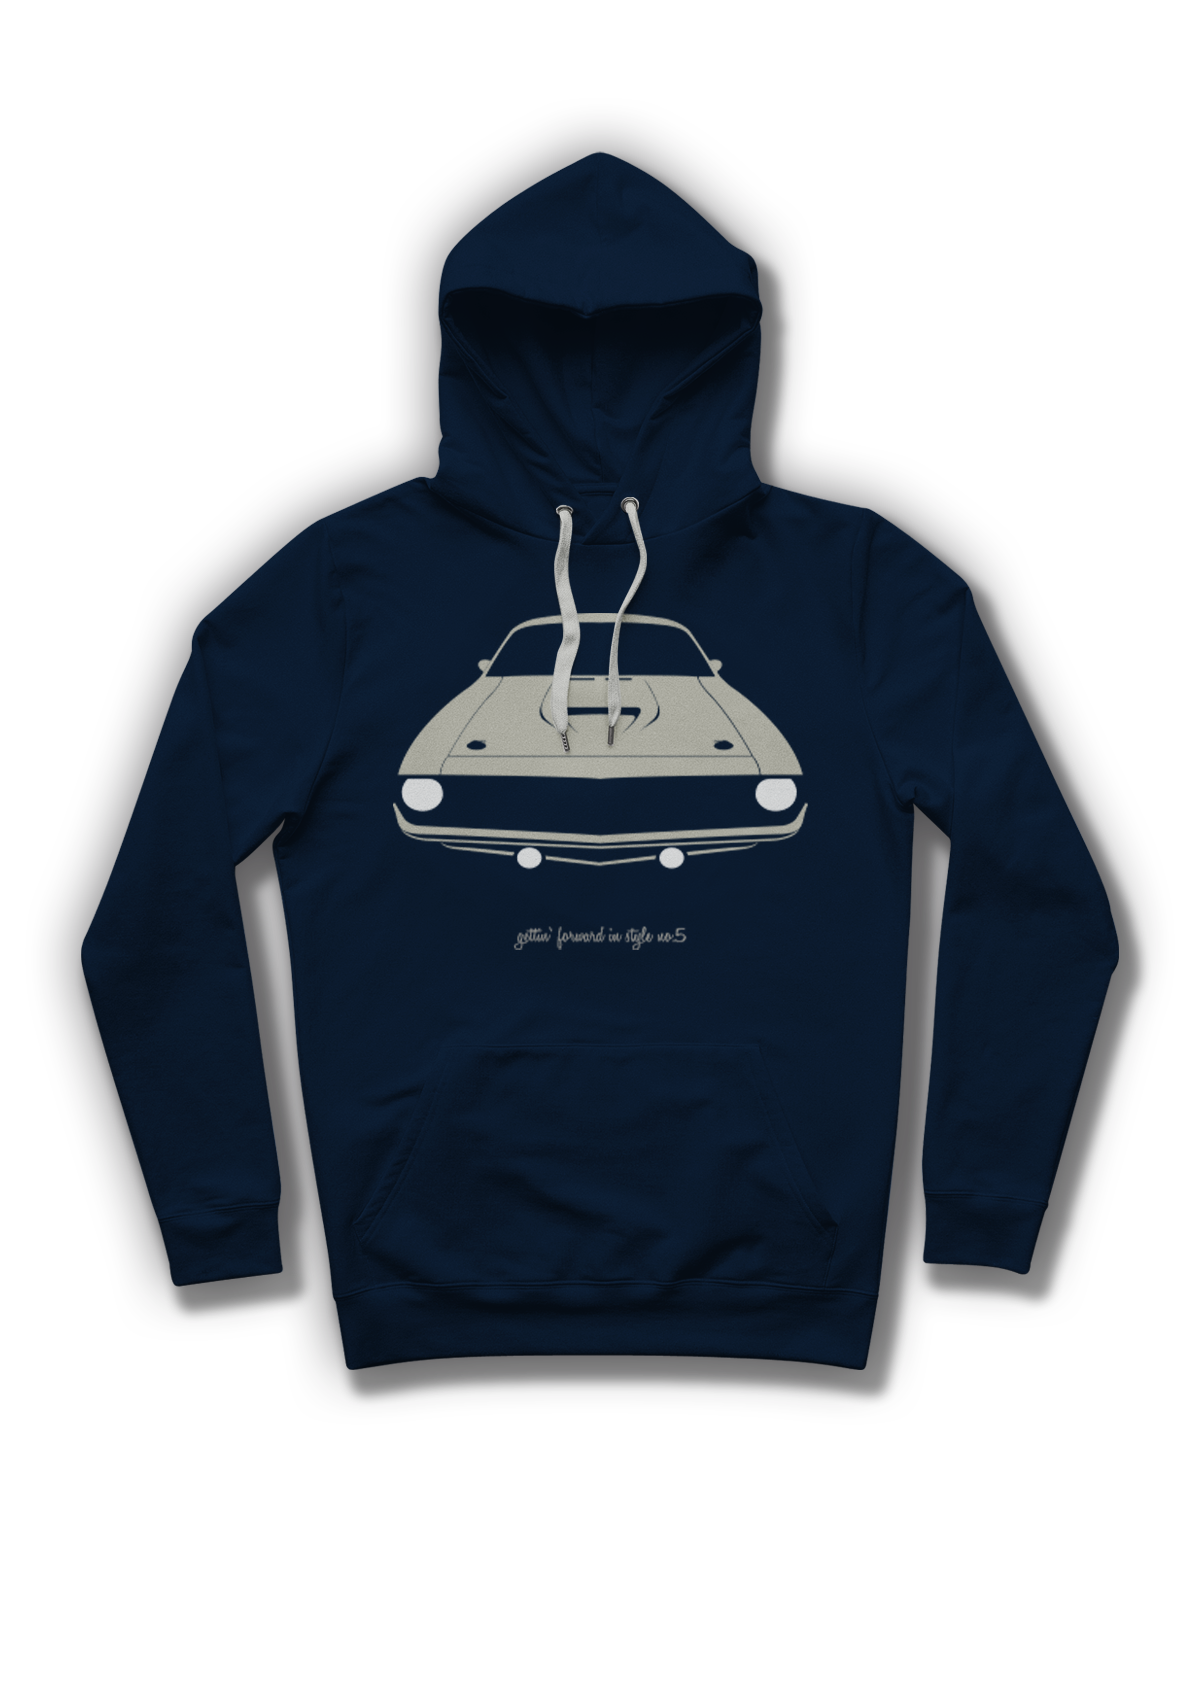 Gettin' forward in style Part No.5 Hoodie